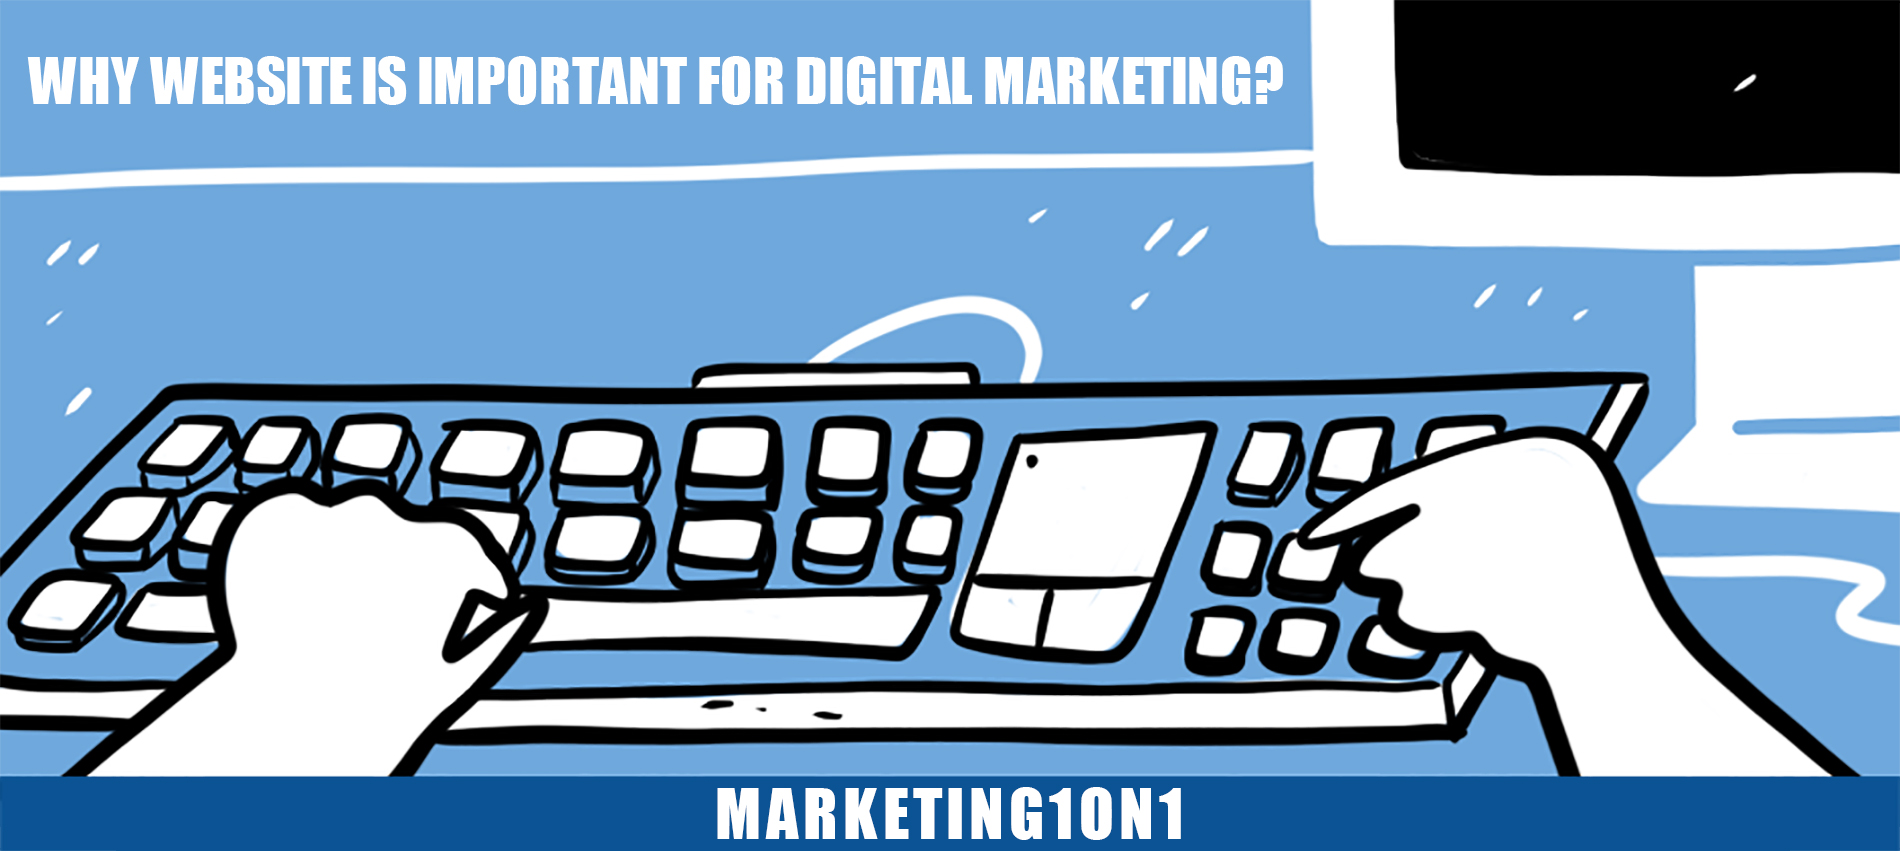 Why website is important for digital marketing?